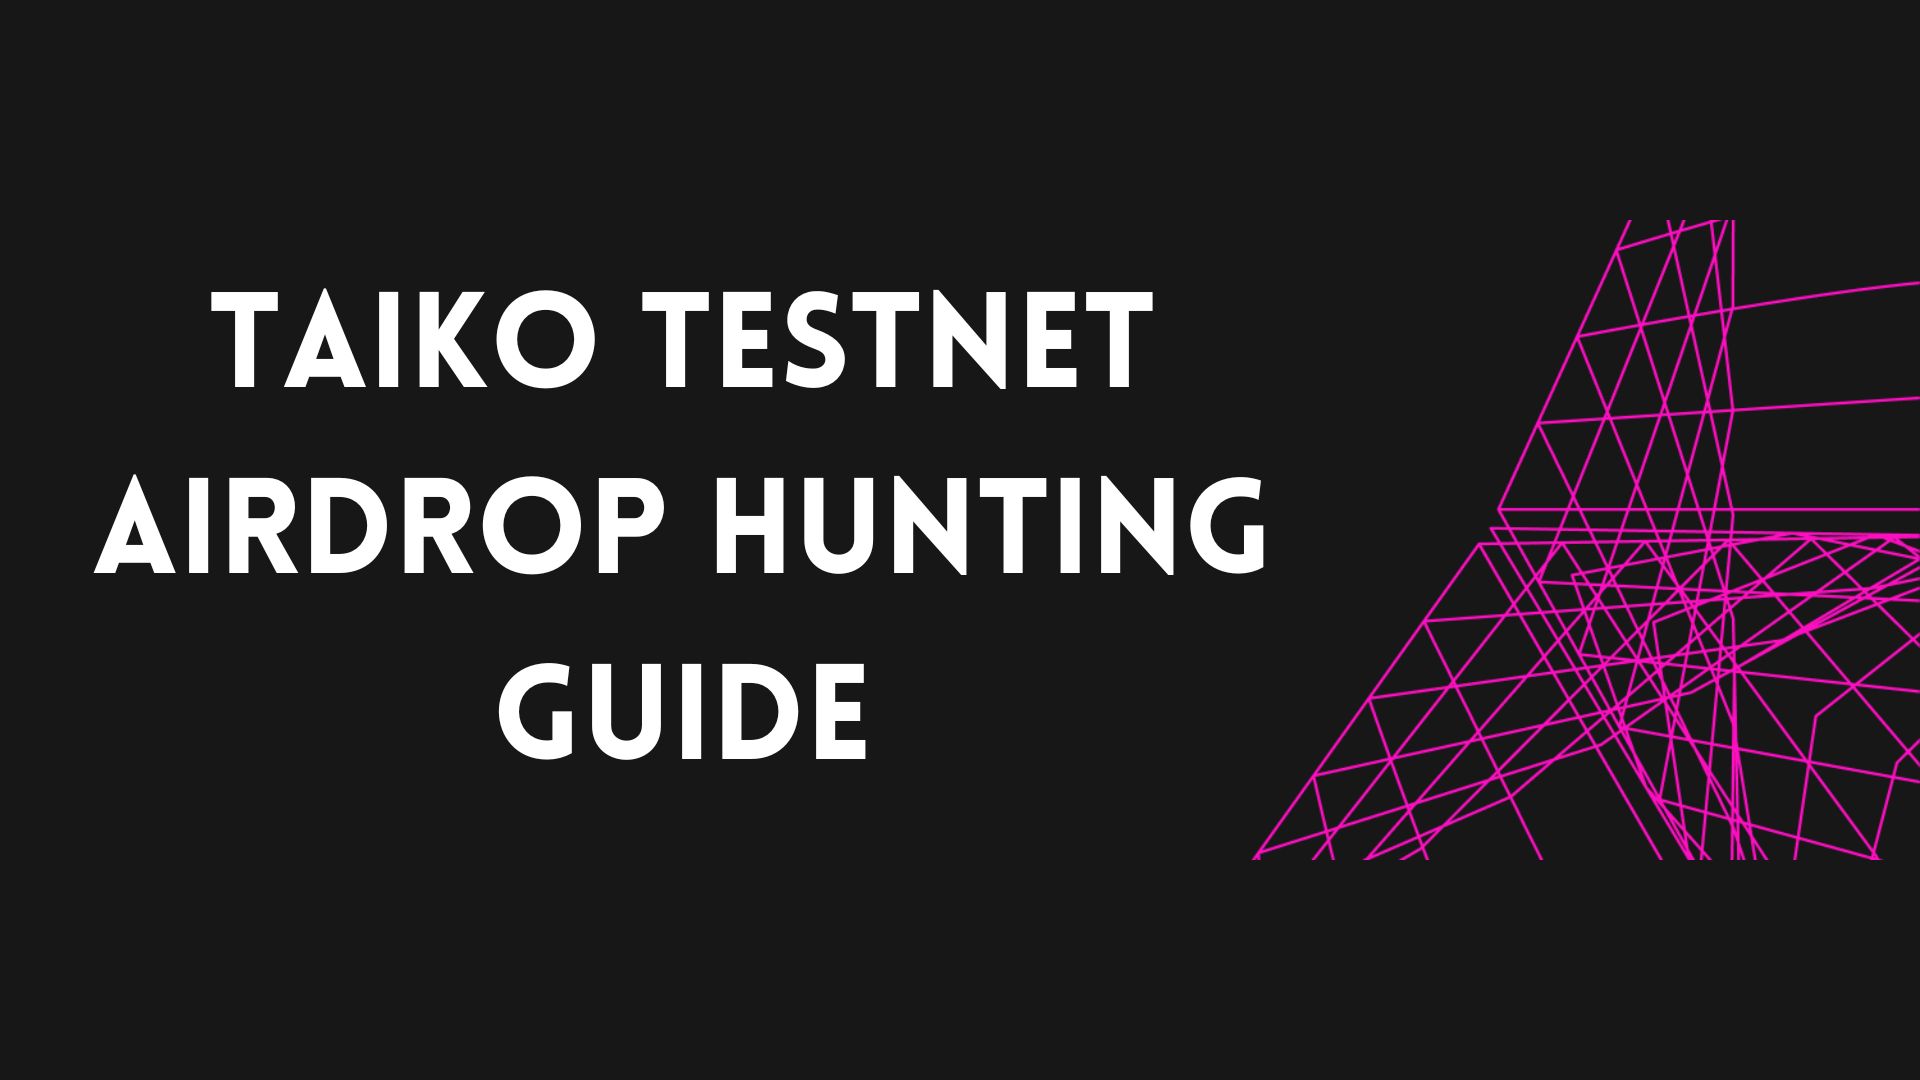 @jerrythefarmer/taiko-testnet-airdrop-hunting-guide-zk-rollup-race-is-heating-up